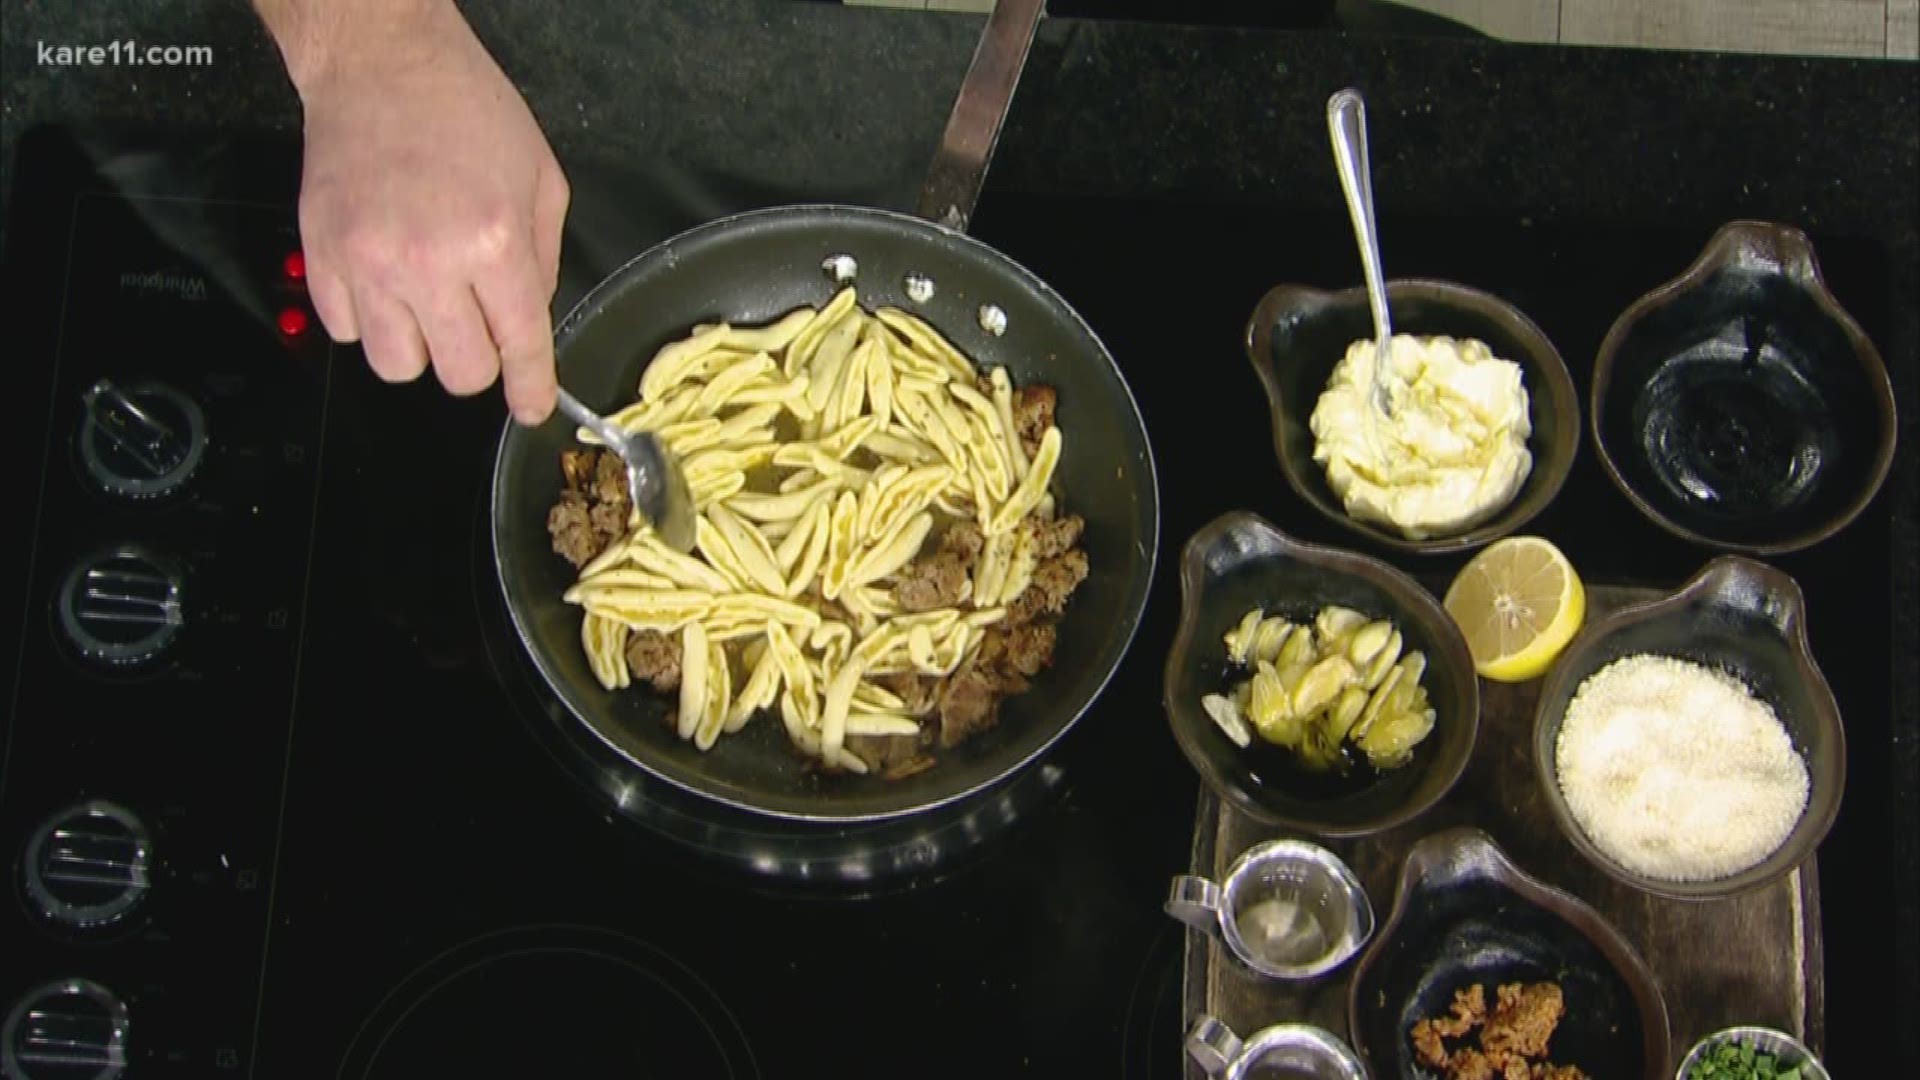 It's World Pasta Month and Red Rabbit Chef Todd says we should leave that boring jar of red sauce in the cupboard and take things up a notch - with Cavatelli with Sausage, Fennel, and Lemon. https://kare11.tv/2DbP26u